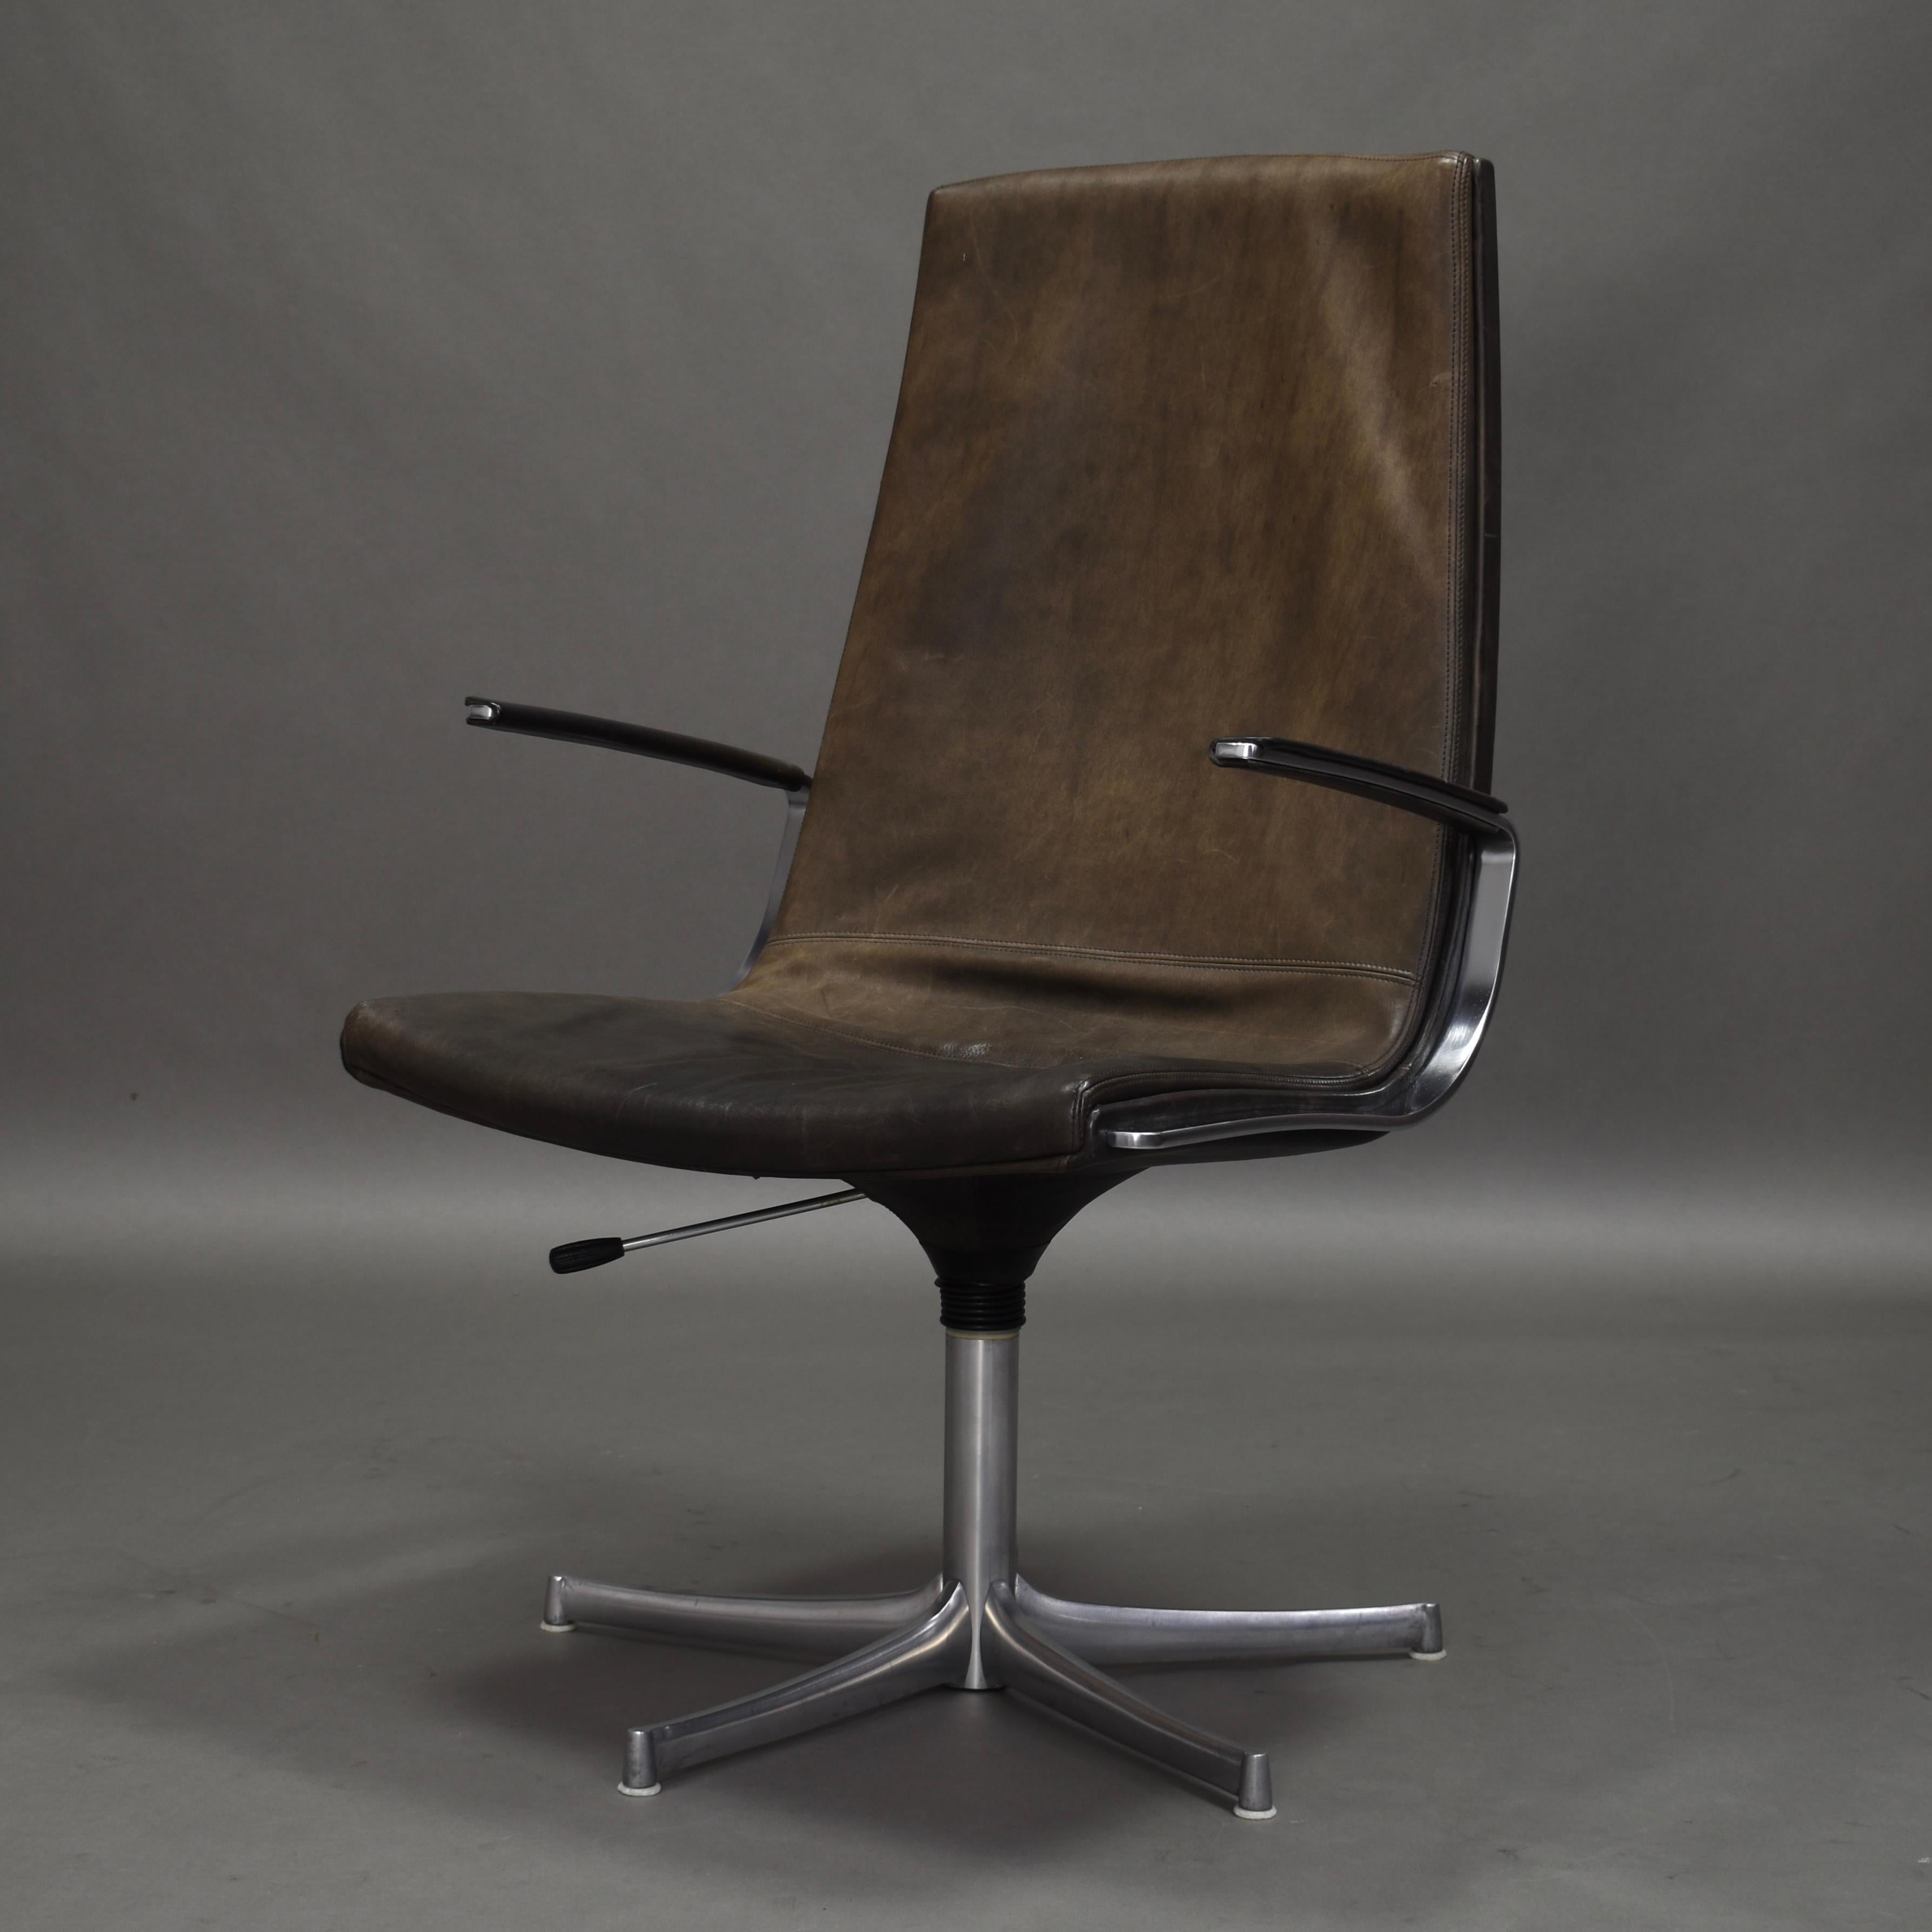 Walter Knoll office / conference / desk chair – Germany, 1975. The chairs swivel 360º and are adjustable in height. price is per piece

In very good condition with beautiful patinated leather and thorough polished aluminum. The leather colour is a